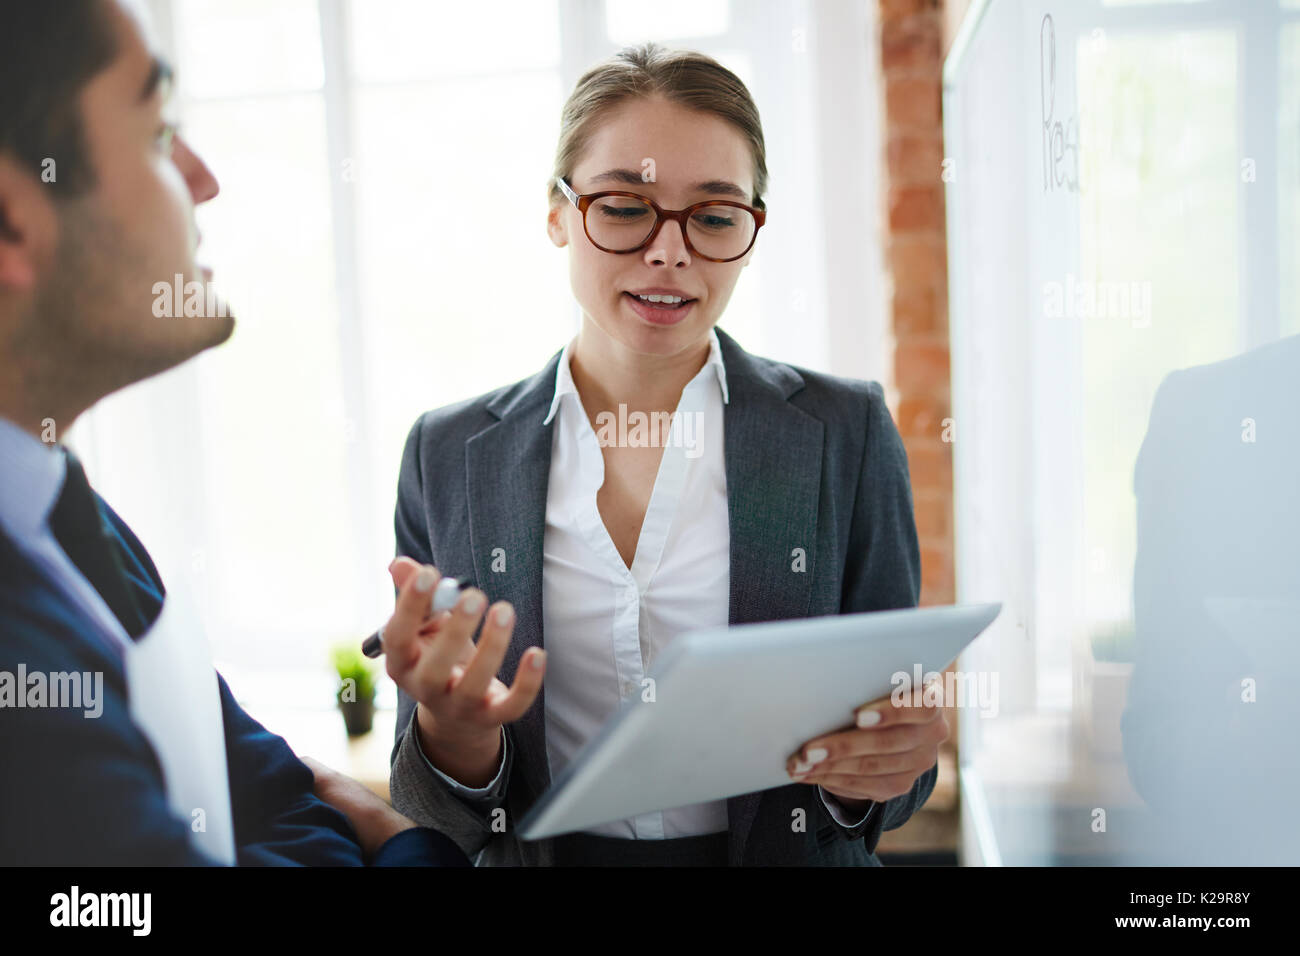 Colleagues interacting Stock Photo